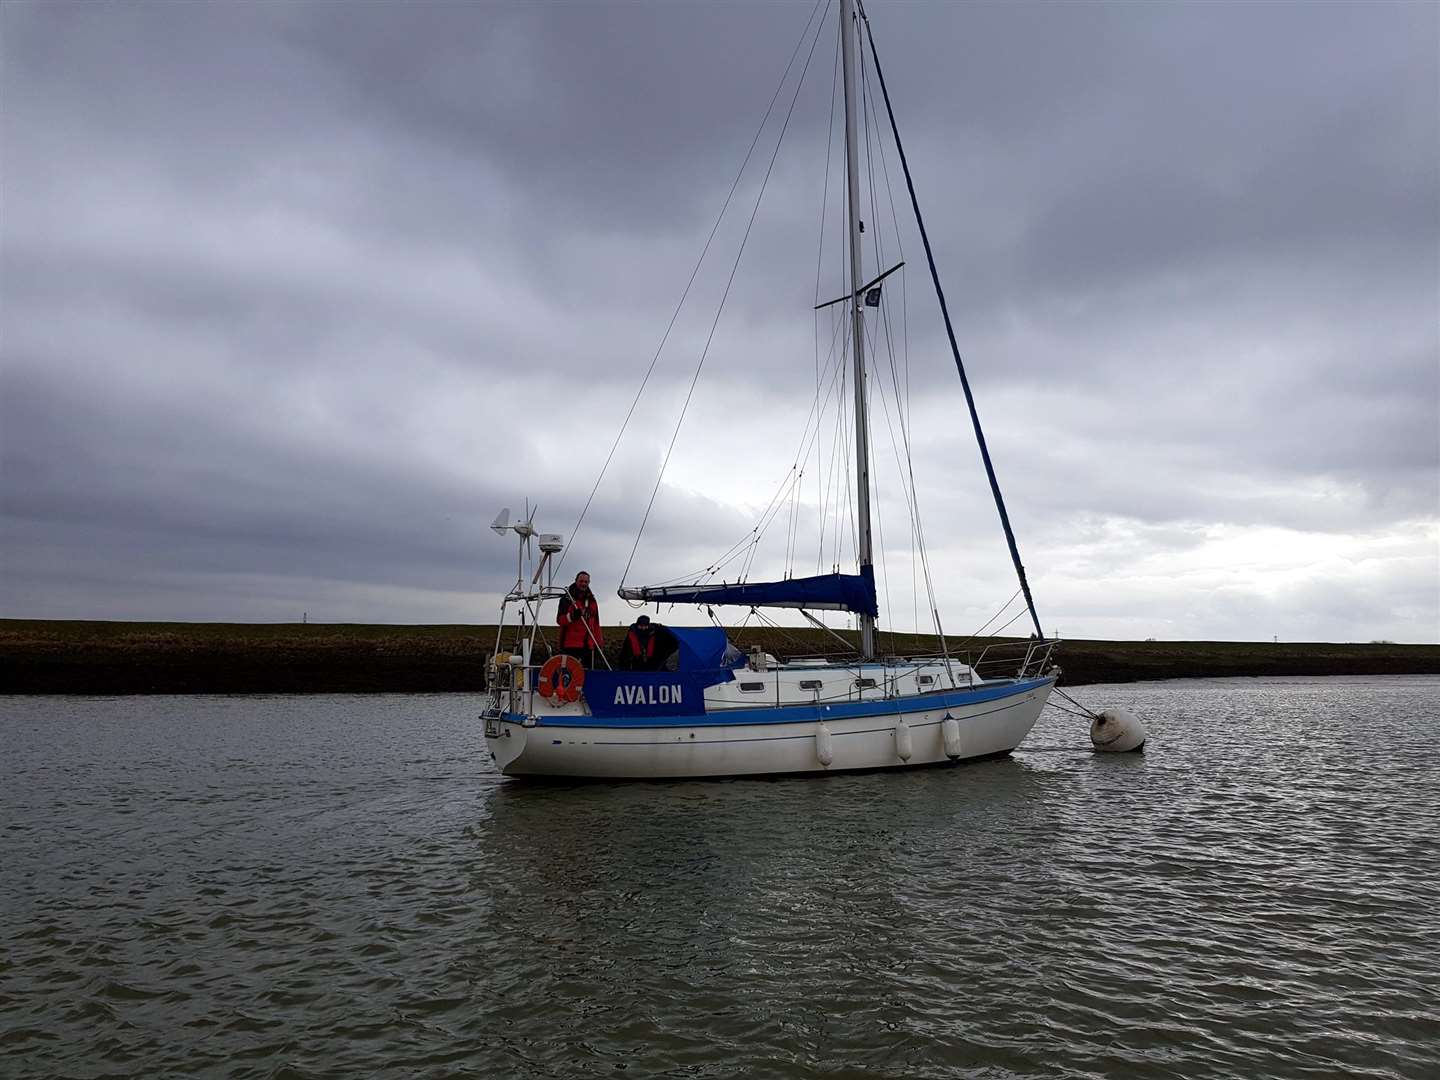 The 33-foot sloop Avalon which required assistance from the Whitstable Lifeboat on Saturdayafternoon. (1348967)